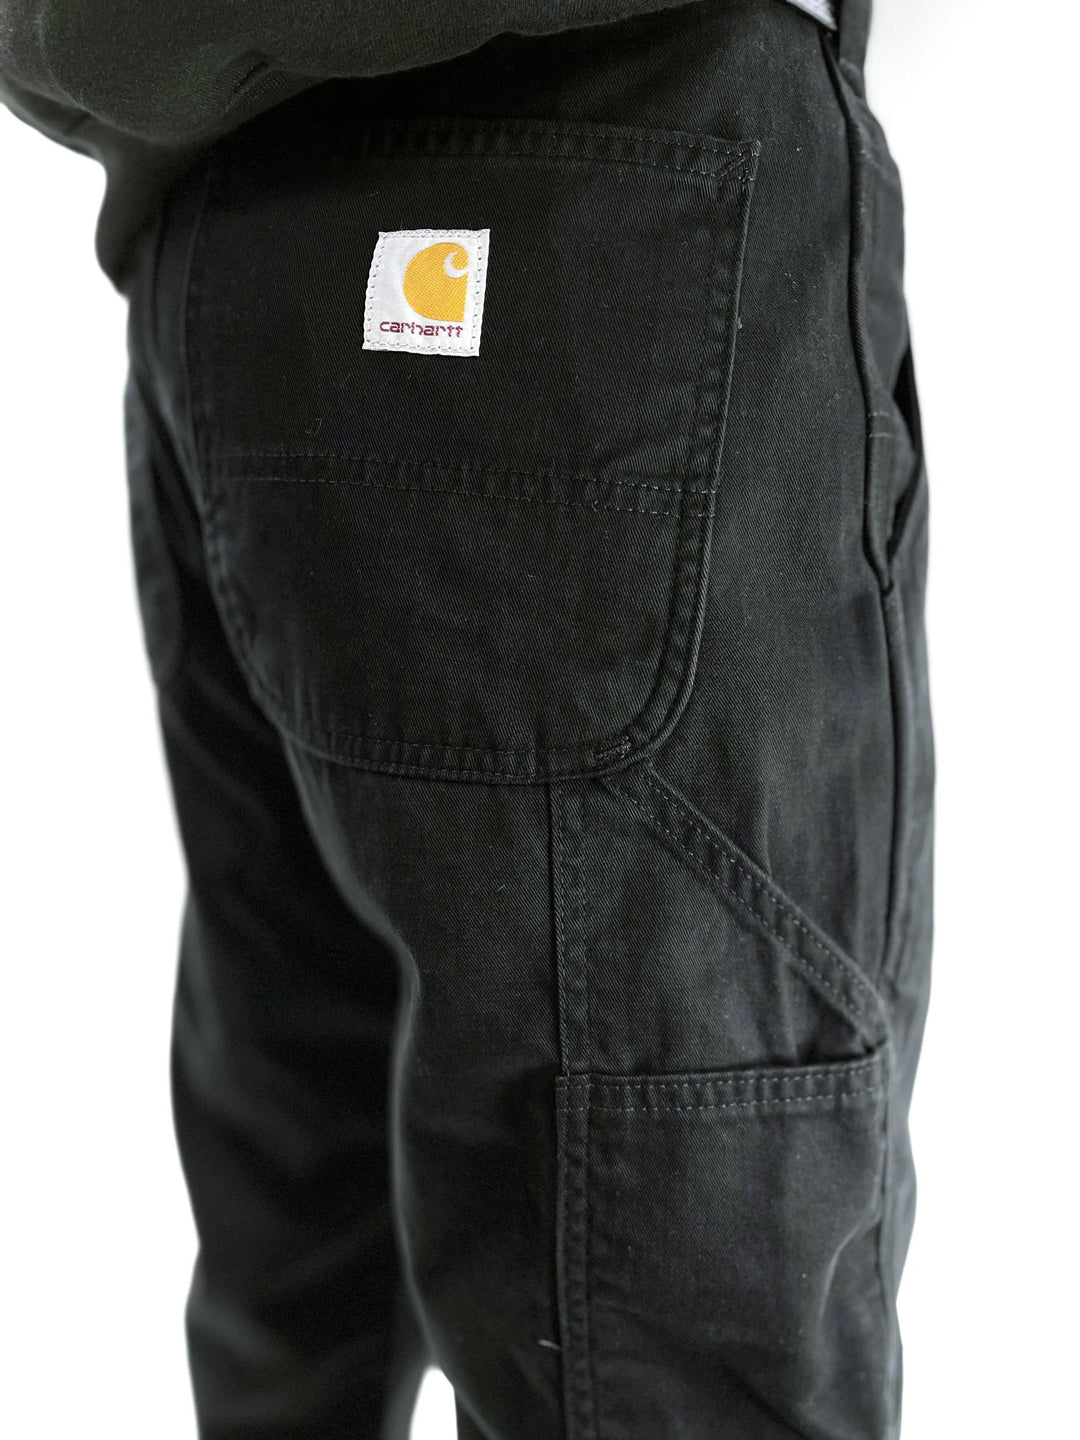 Carhartt Washed Twill Relaxed Fit Pant Black Prior